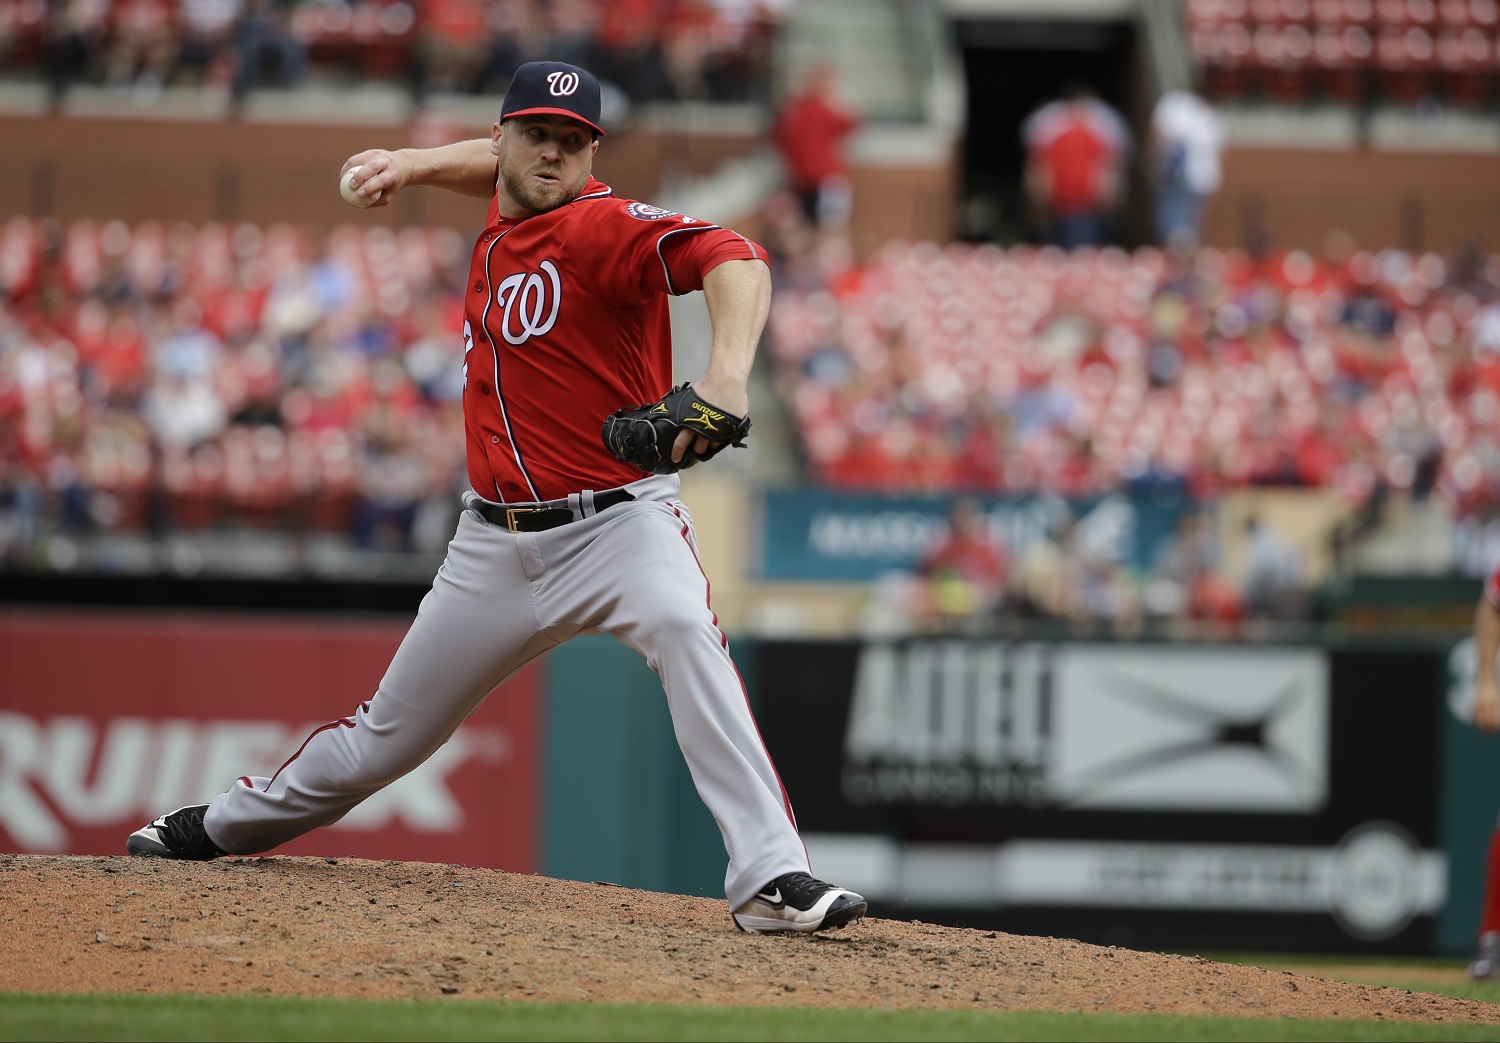 Washington Nationals relief pitcher Shawn Kelley throws during the ninth inning of a baseball game against the St. Louis Cardinals Saturday, April 30, 2016, in St. Louis. The Nationals won 6-1. (AP Photo/Jeff Roberson)